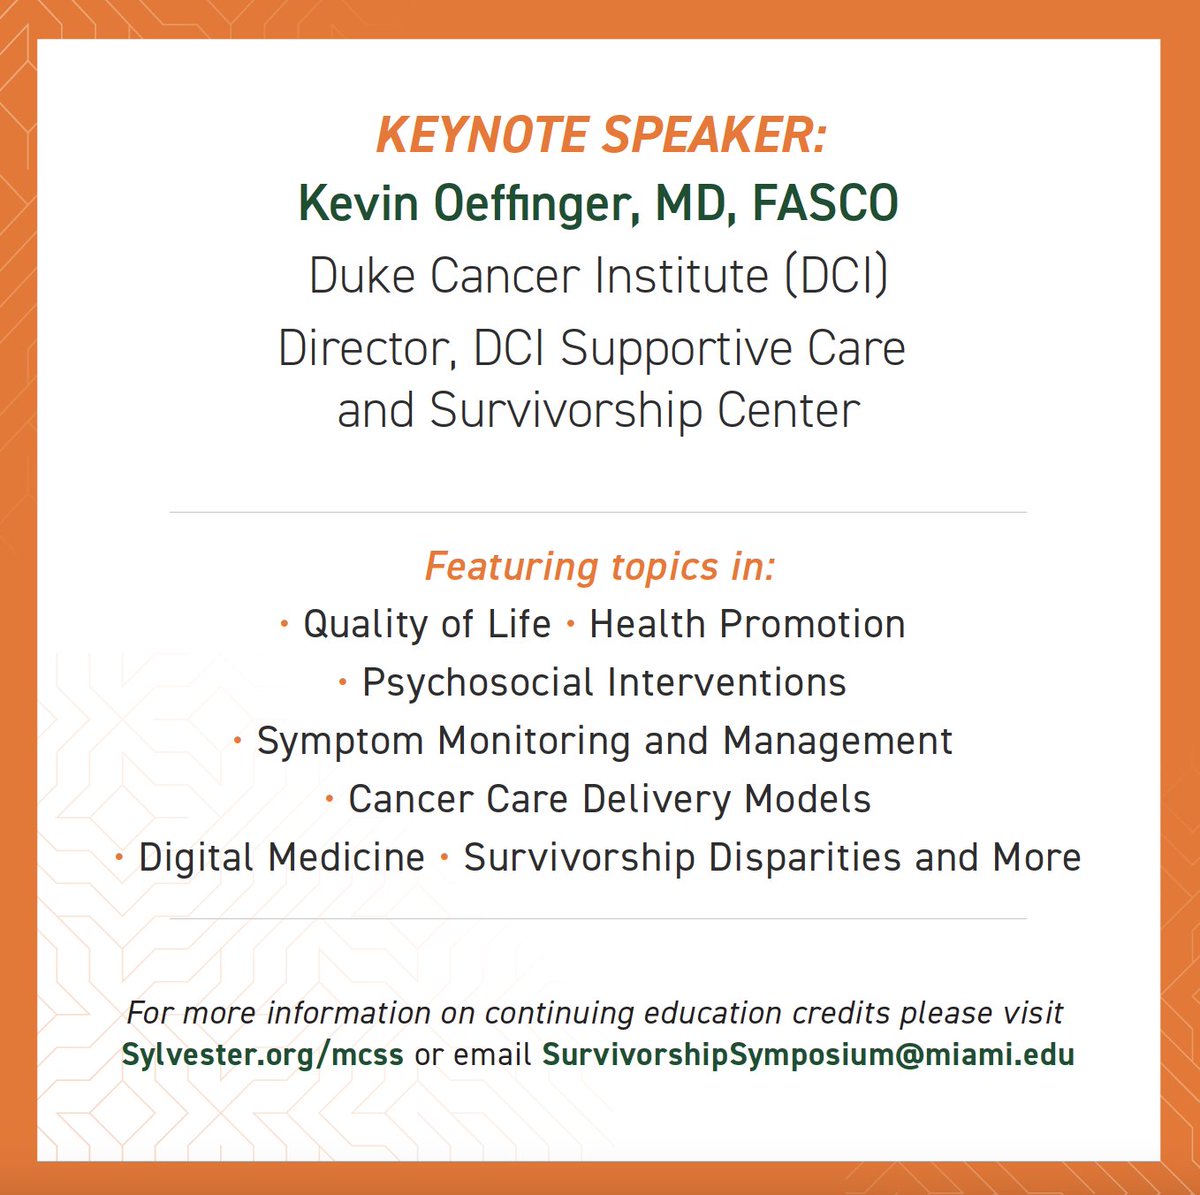 Calling all #cancer providers and #researchers! Join us at the inaugural Sylvester Cancer #Survivorship Symposium. The event will focus on topics such as symptom burden, quality of life in survivorship, disparities in survivorship outcomes, and much more! loom.ly/ievVhX4